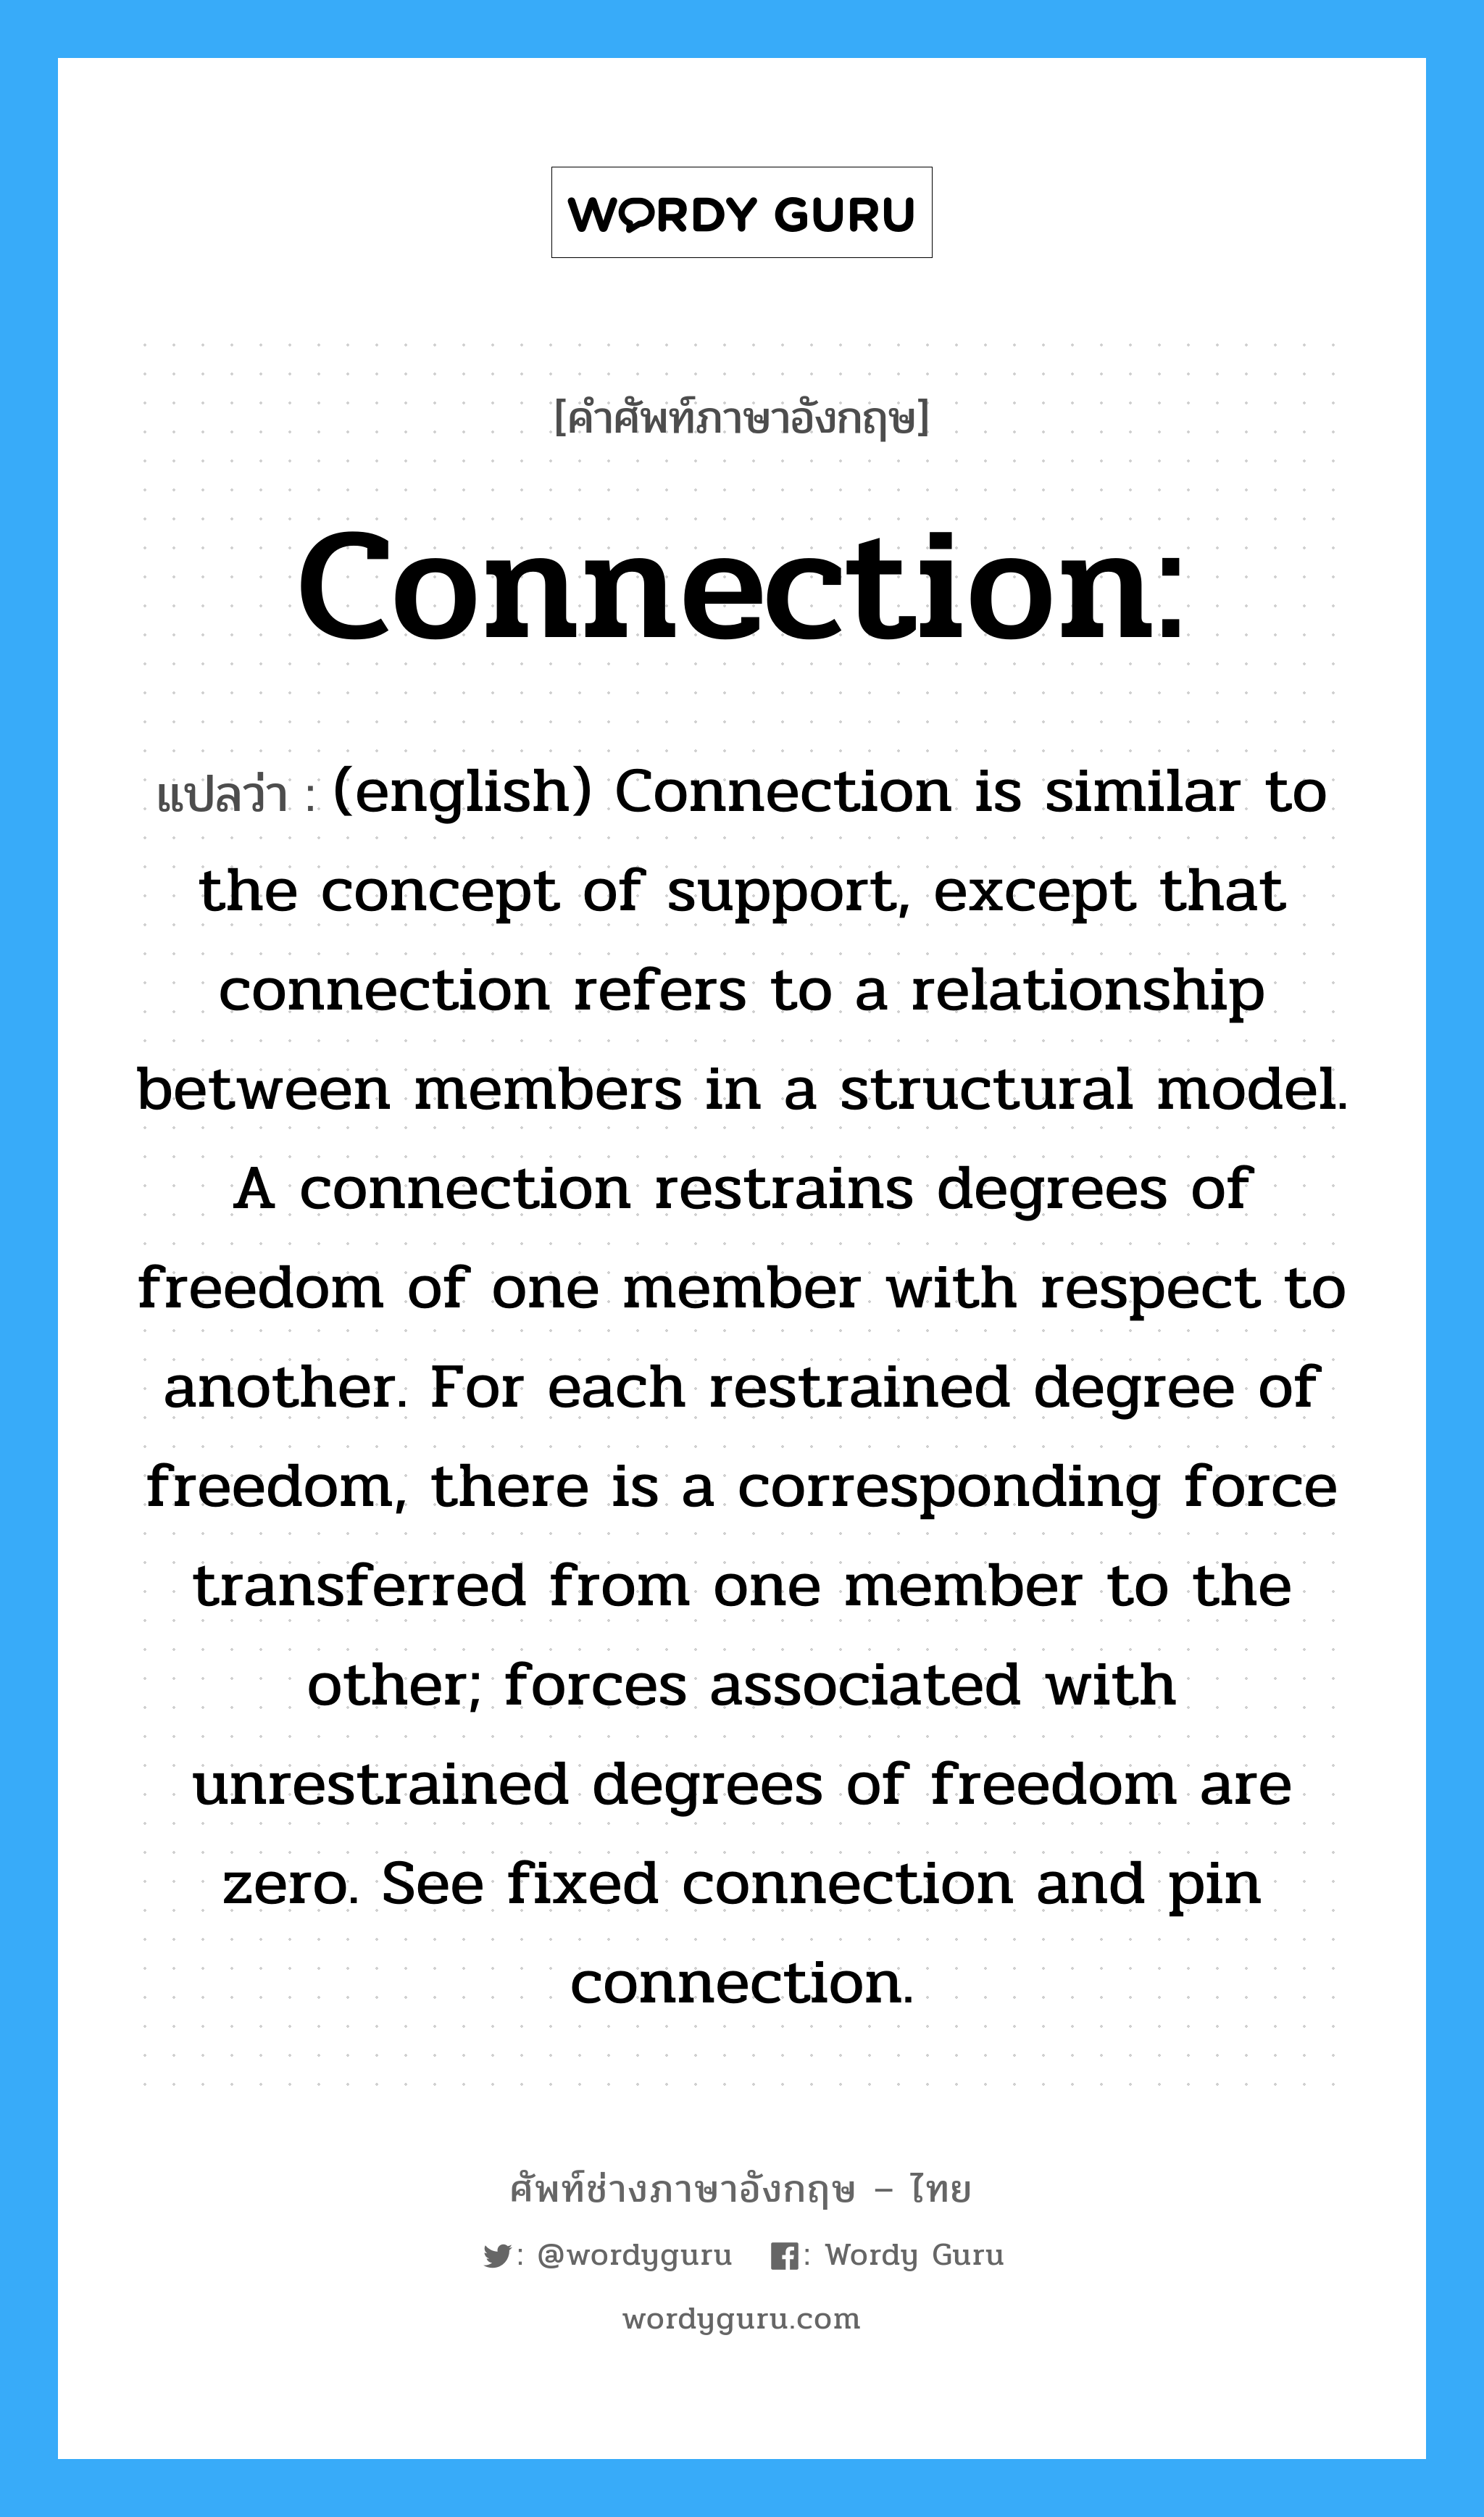 (english) Connection is similar to the concept of support, except that connection refers to a relationship between members in a structural model. A connection restrains degrees of freedom of one member with respect to another. For each restrained degree of freedom, there is a corresponding force transferred from one member to the other; forces associated with unrestrained degrees of freedom are zero. See fixed connection and pin connection. ภาษาอังกฤษ?, คำศัพท์ช่างภาษาอังกฤษ - ไทย (english) Connection is similar to the concept of support, except that connection refers to a relationship between members in a structural model. A connection restrains degrees of freedom of one member with respect to another. For each restrained degree of freedom, there is a corresponding force transferred from one member to the other; forces associated with unrestrained degrees of freedom are zero. See fixed connection and pin connection. คำศัพท์ภาษาอังกฤษ (english) Connection is similar to the concept of support, except that connection refers to a relationship between members in a structural model. A connection restrains degrees of freedom of one member with respect to another. For each restrained degree of freedom, there is a corresponding force transferred from one member to the other; forces associated with unrestrained degrees of freedom are zero. See fixed connection and pin connection. แปลว่า Connection: